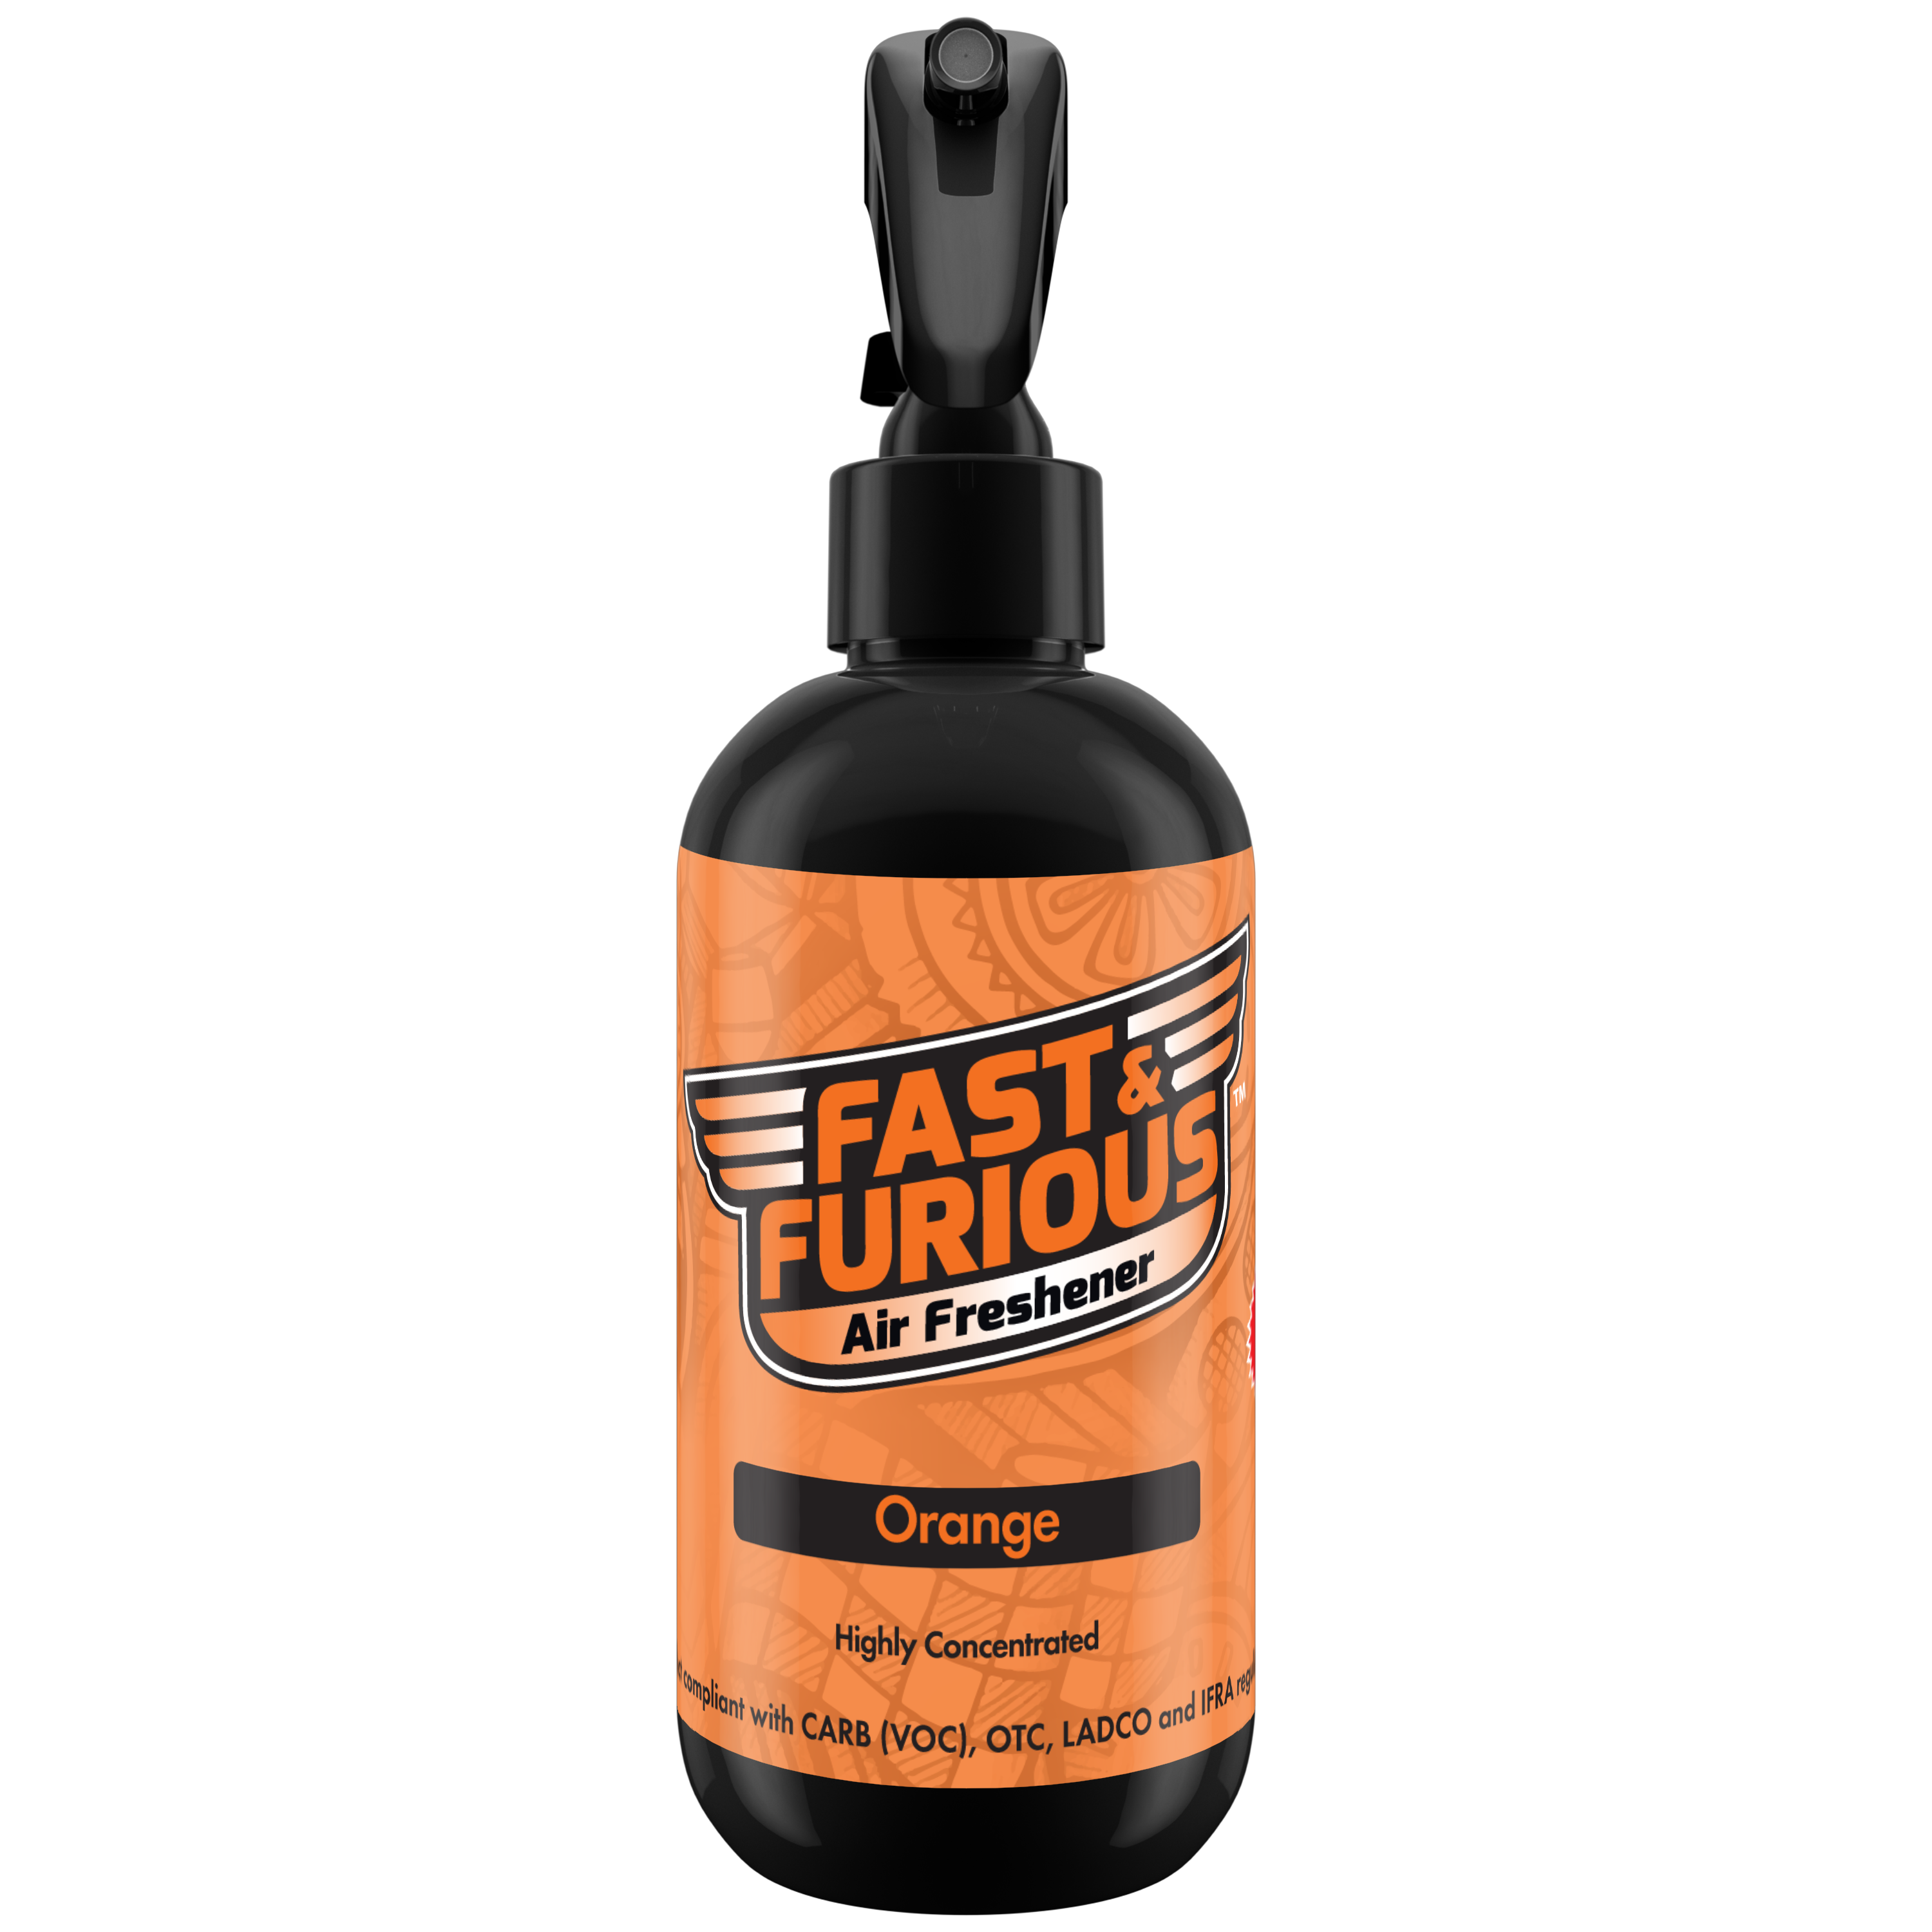 Fast and Furious Air Freshener - Orange Scent